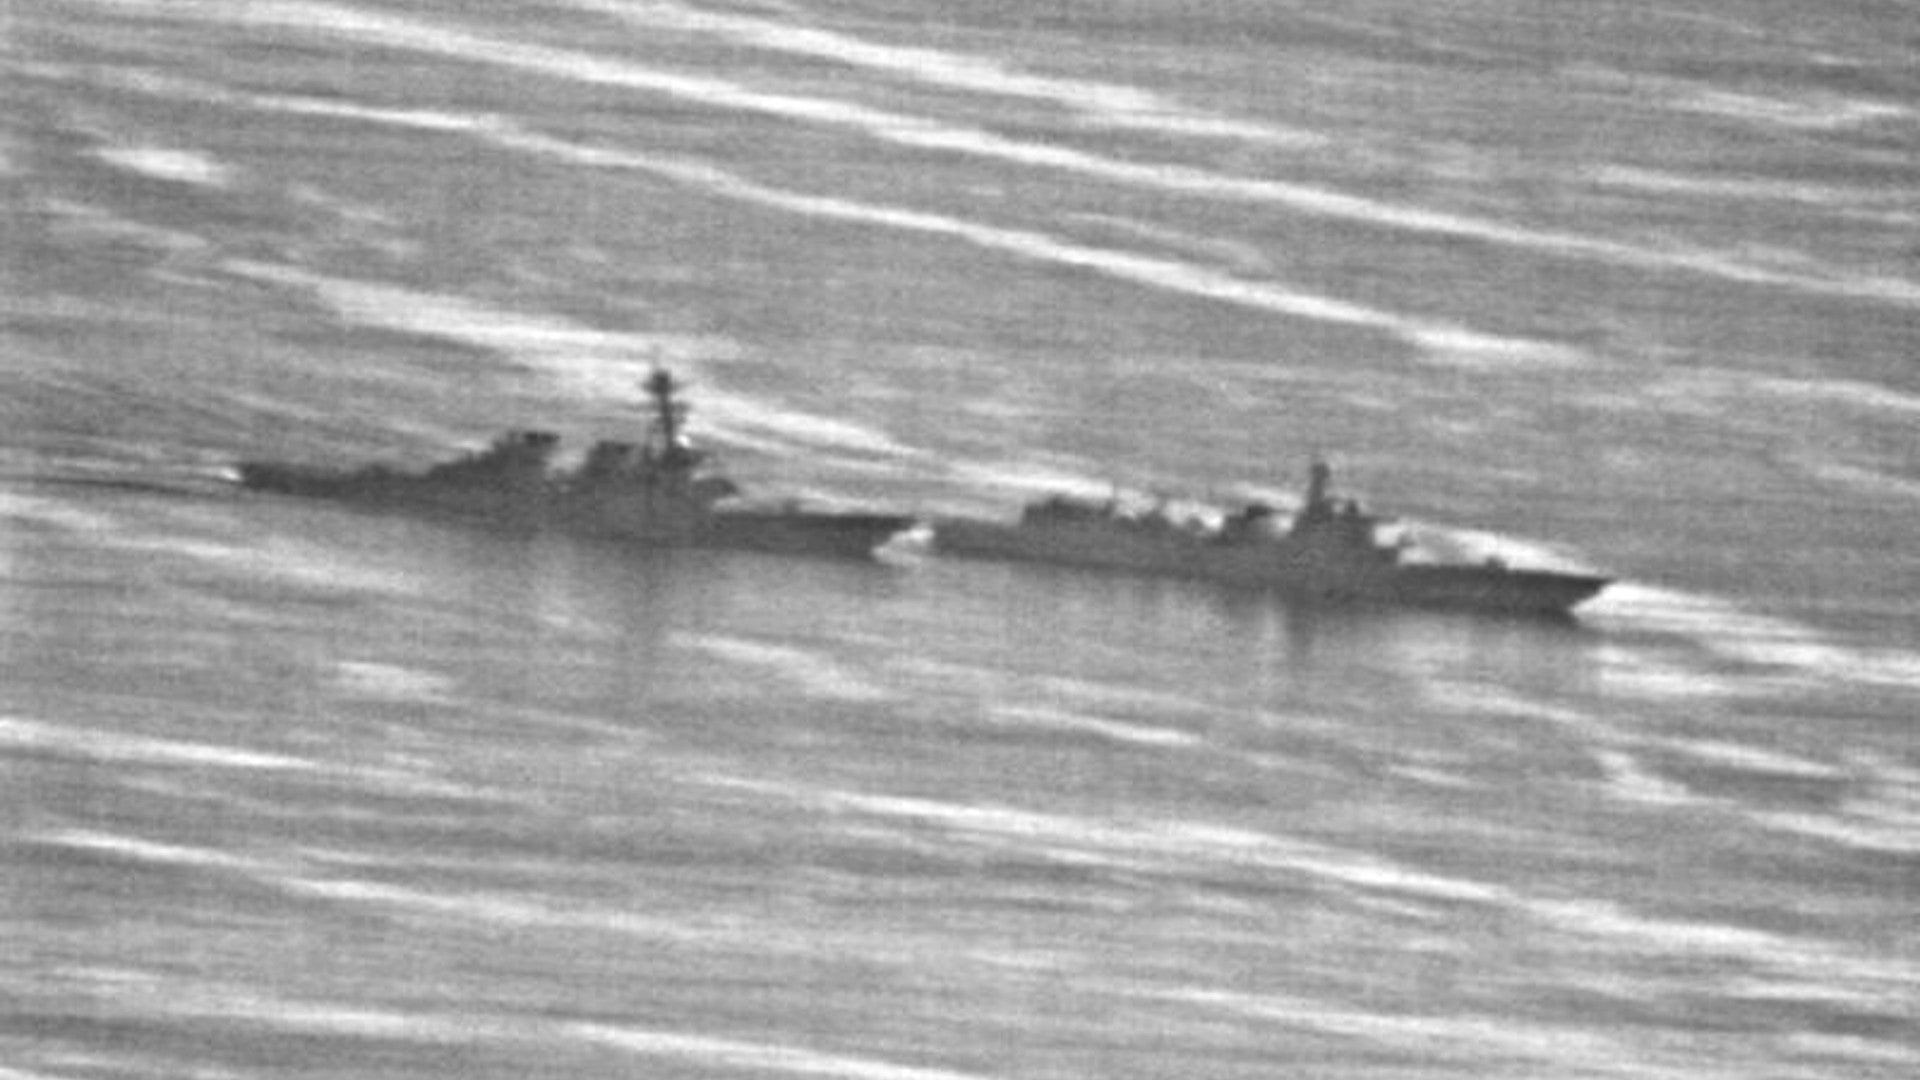 U.S. Navy Releases Images Of Chinese Warship’s Dangerous Maneuvers Near Its Destroyer